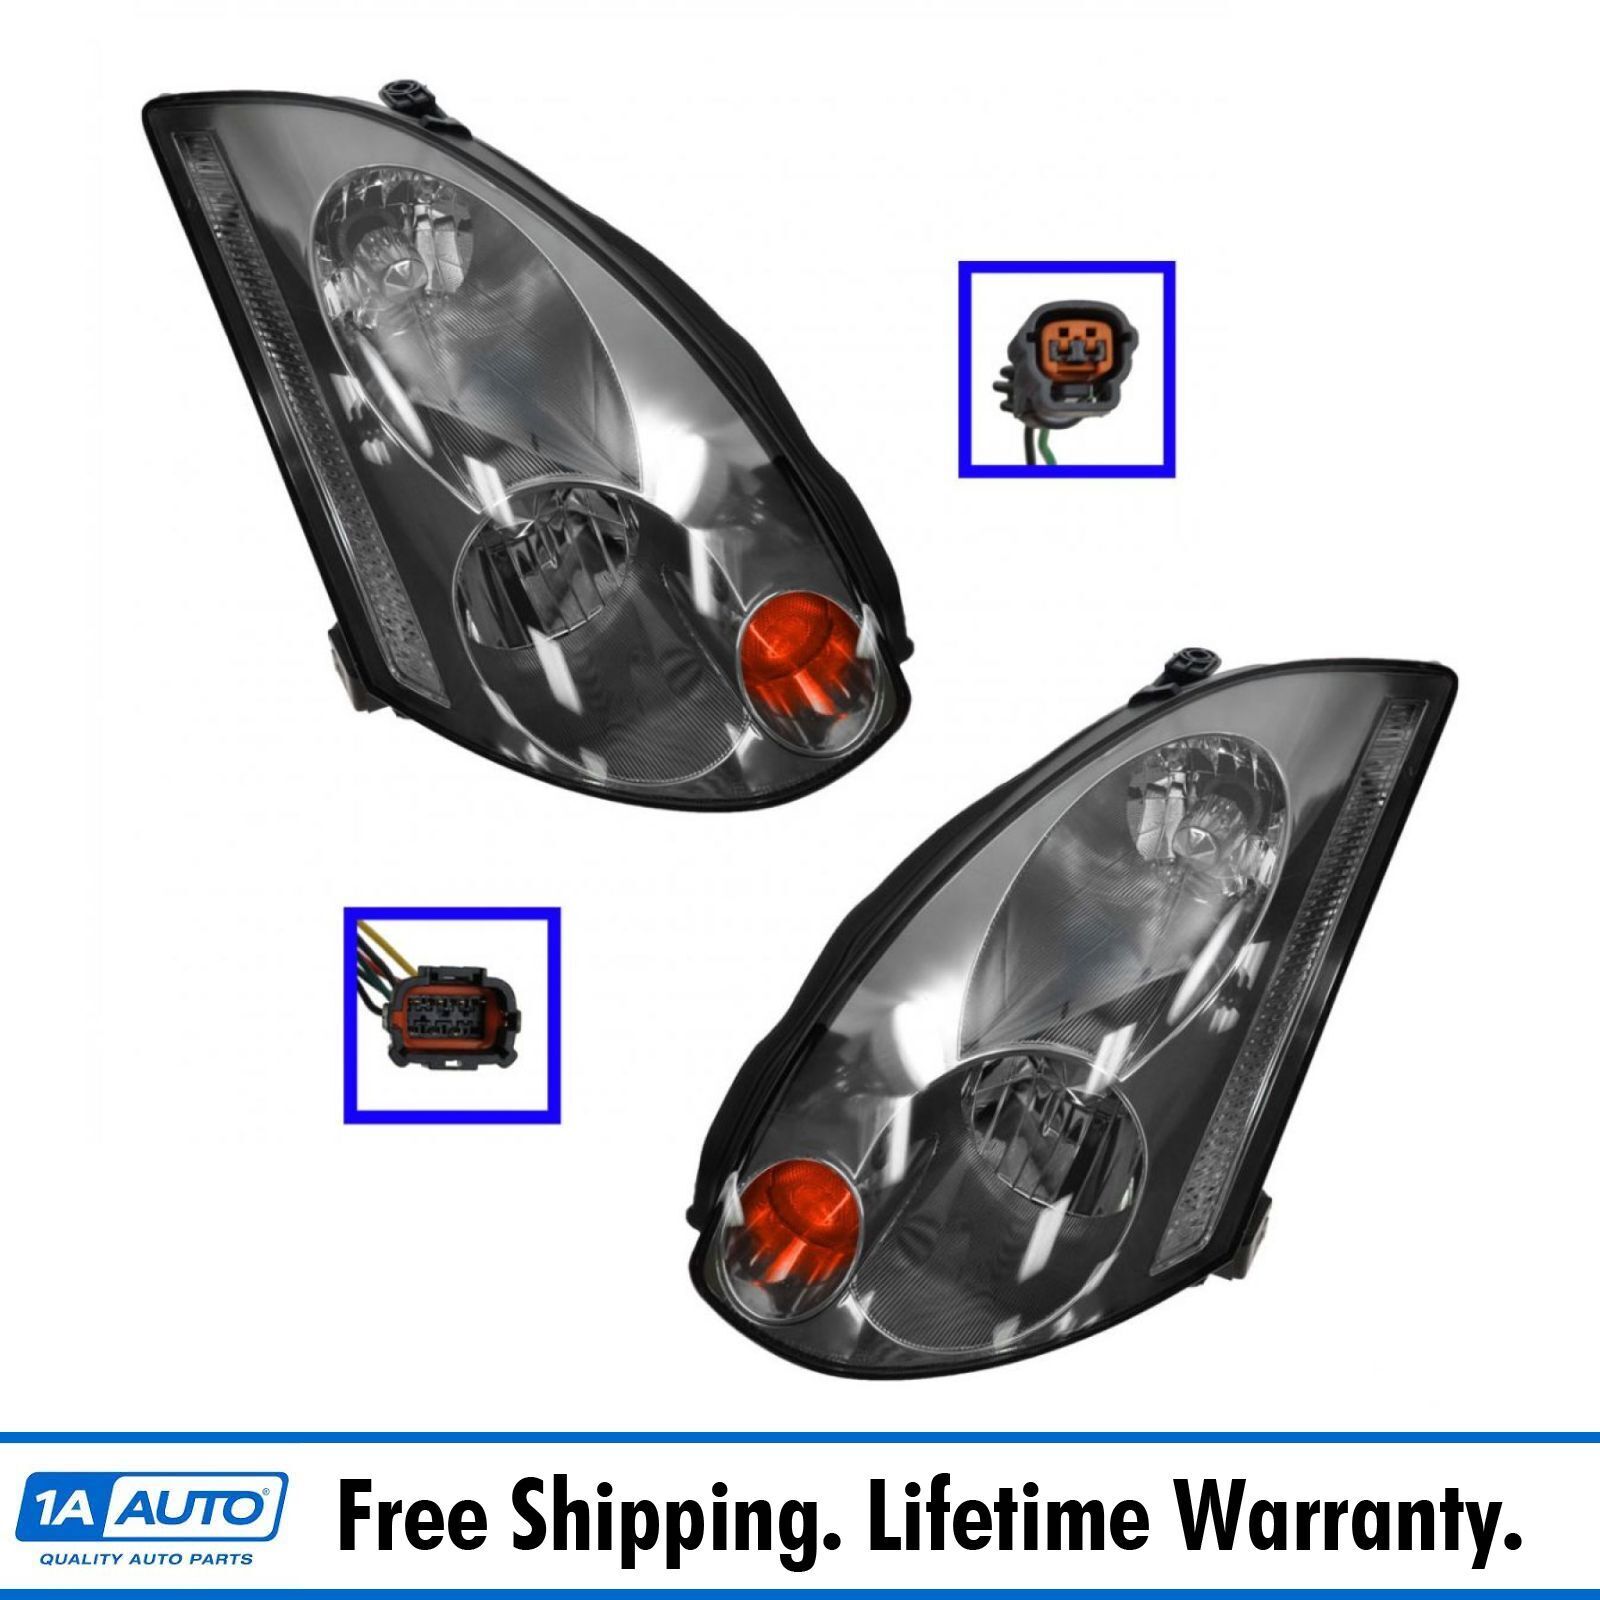 Xenon HID Headlights Headlamps Left/Right Pair Set for 03-05 Infiniti G35 Coupe